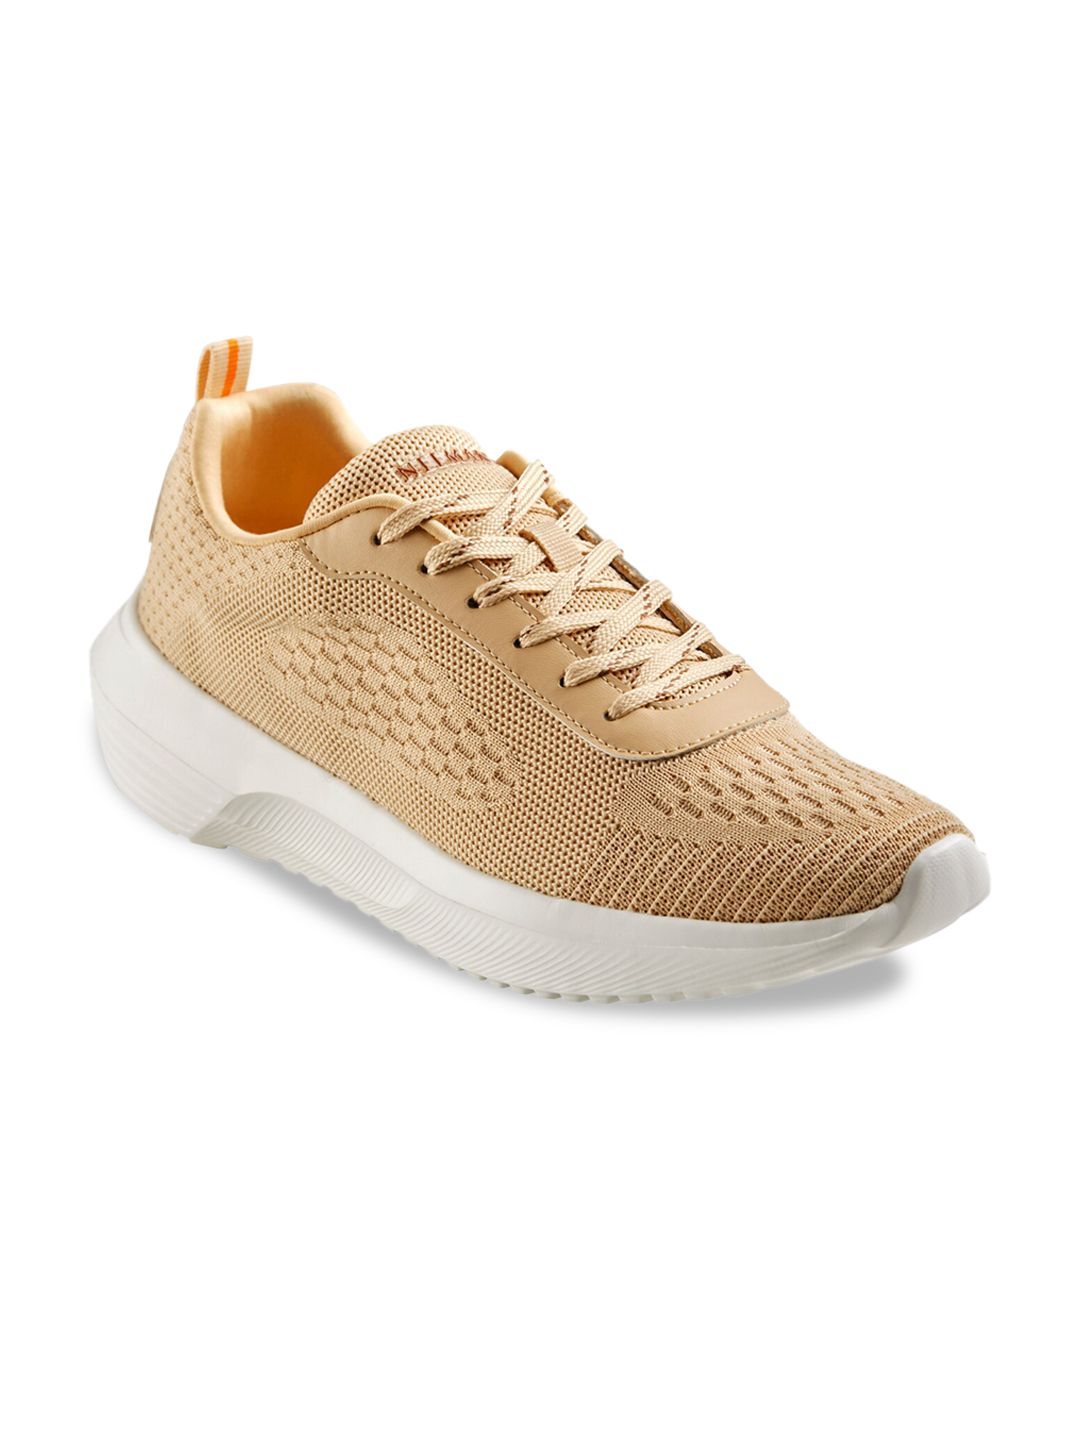 NEEMANS Woven Design Lace-Up Sneakers Price in India